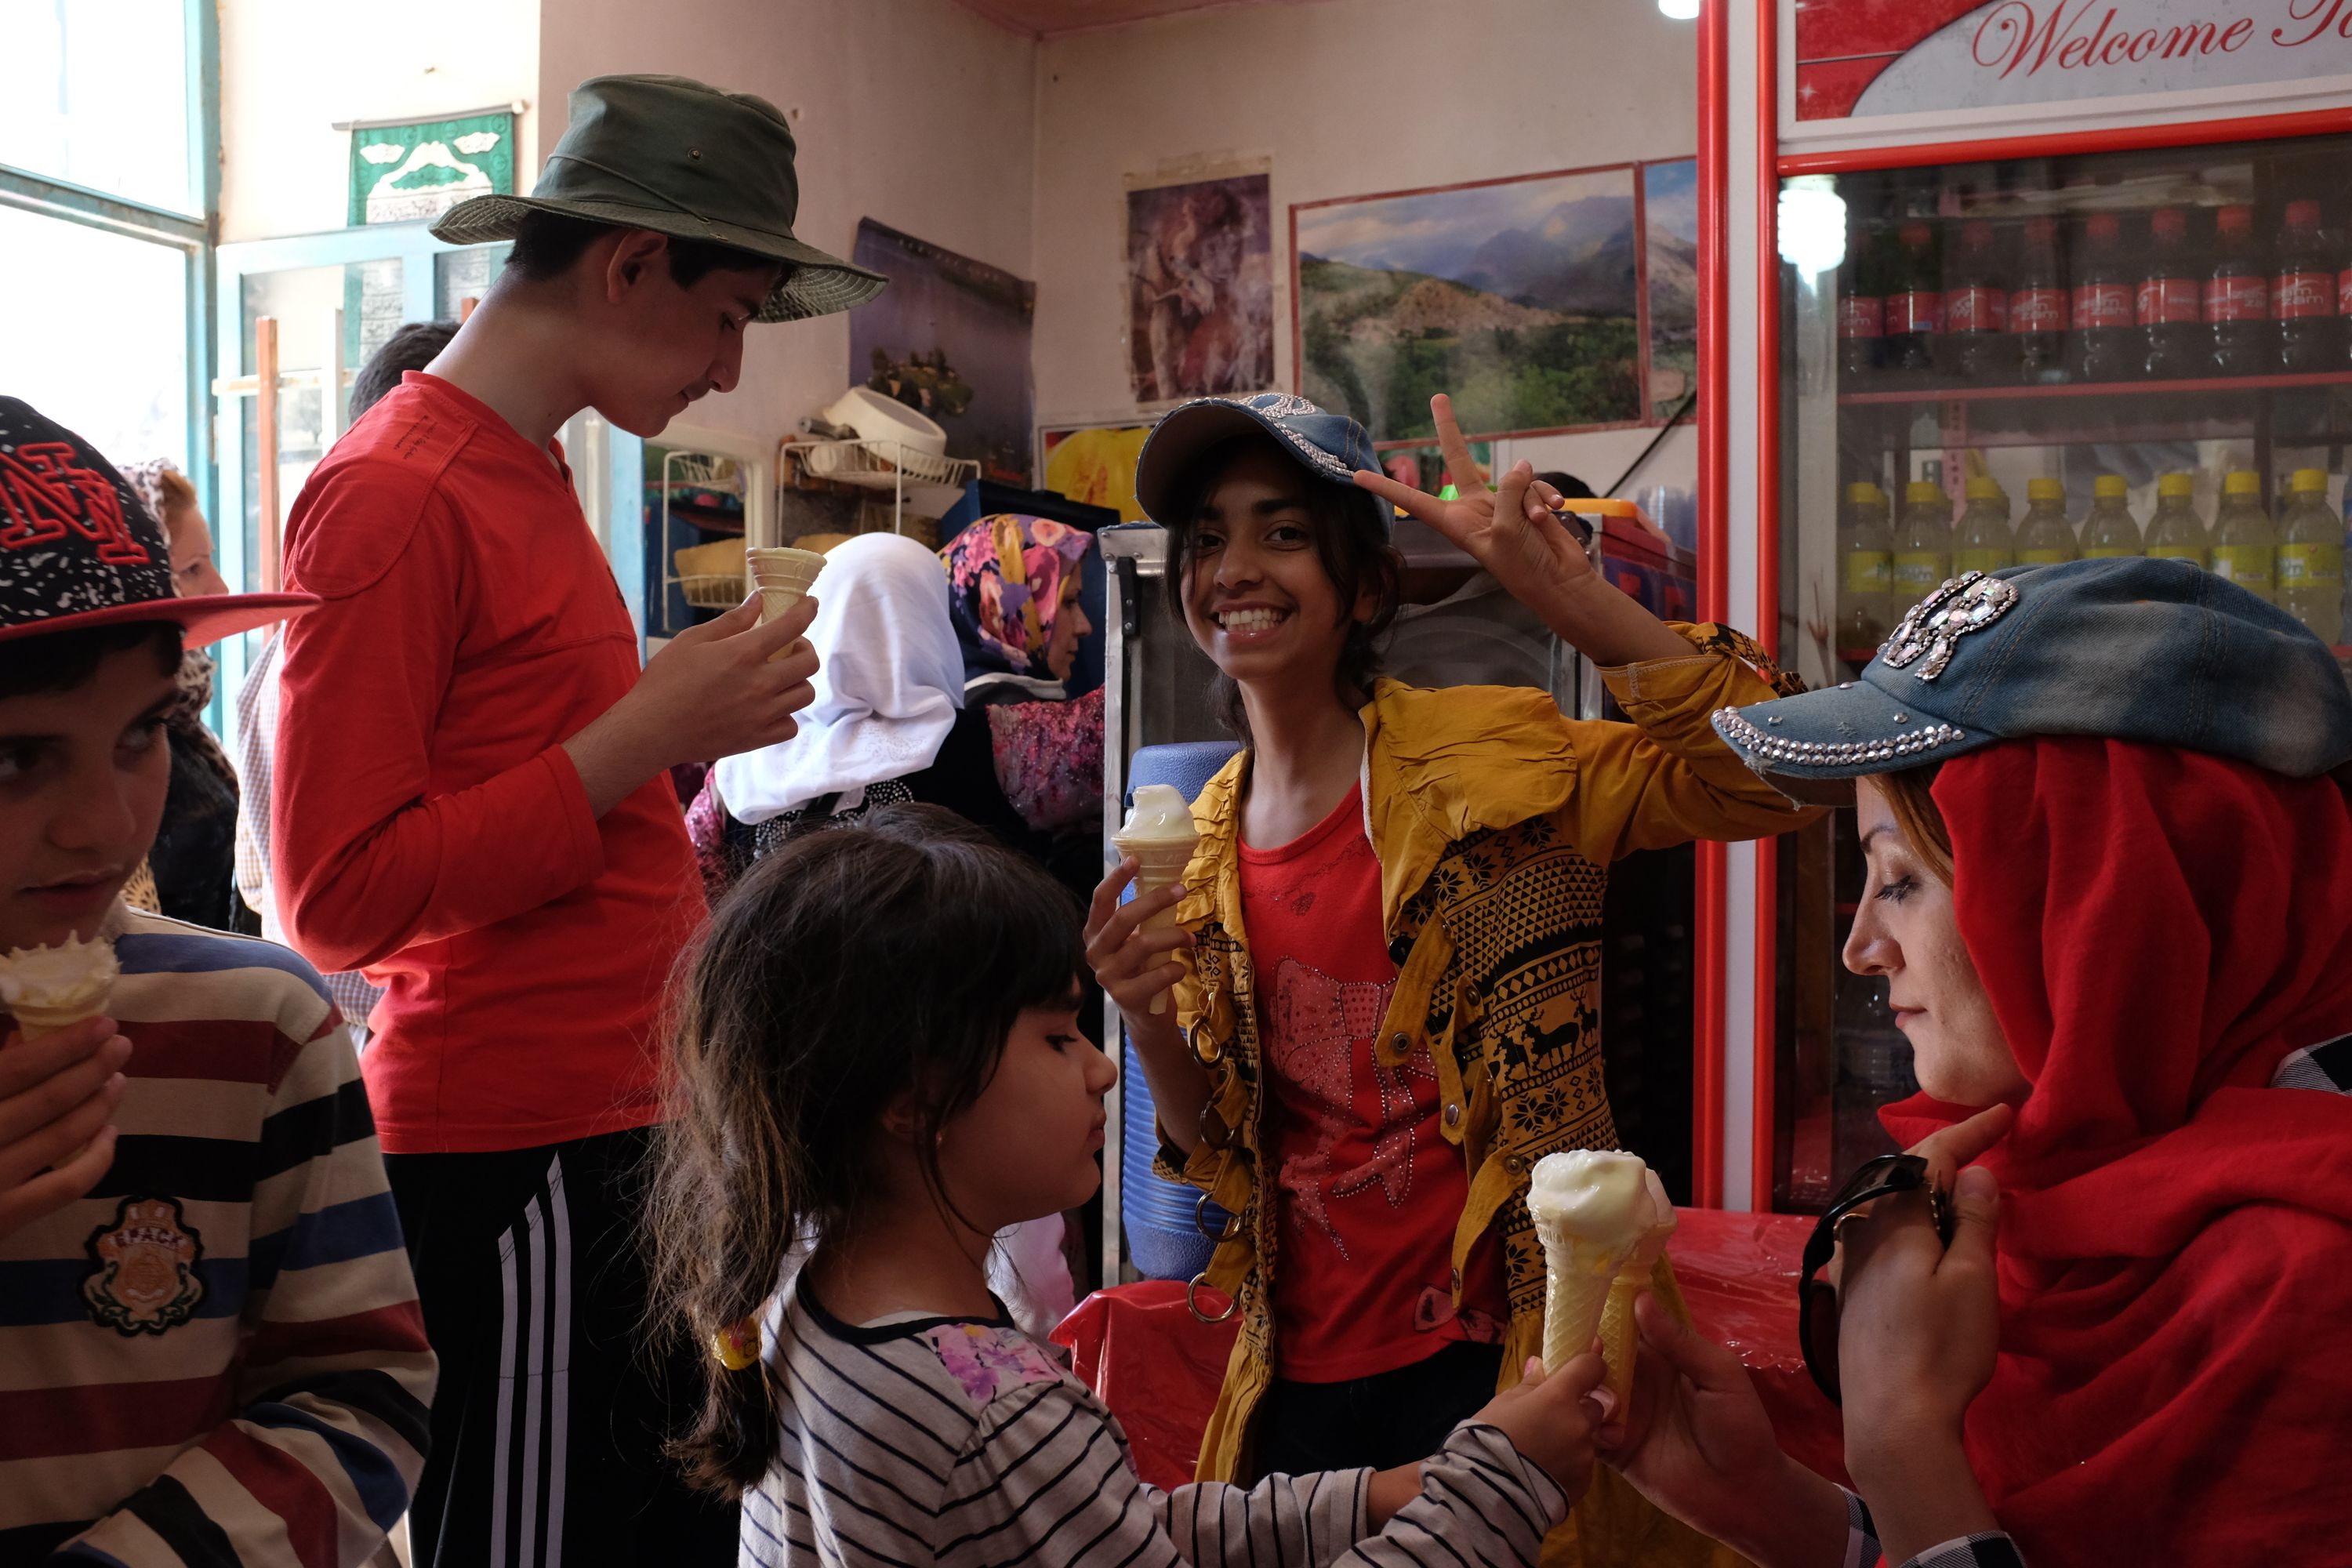 Three girls and two boys of various ages eat ice cream in a shop; one of the girls shows the V-sign into the camera.